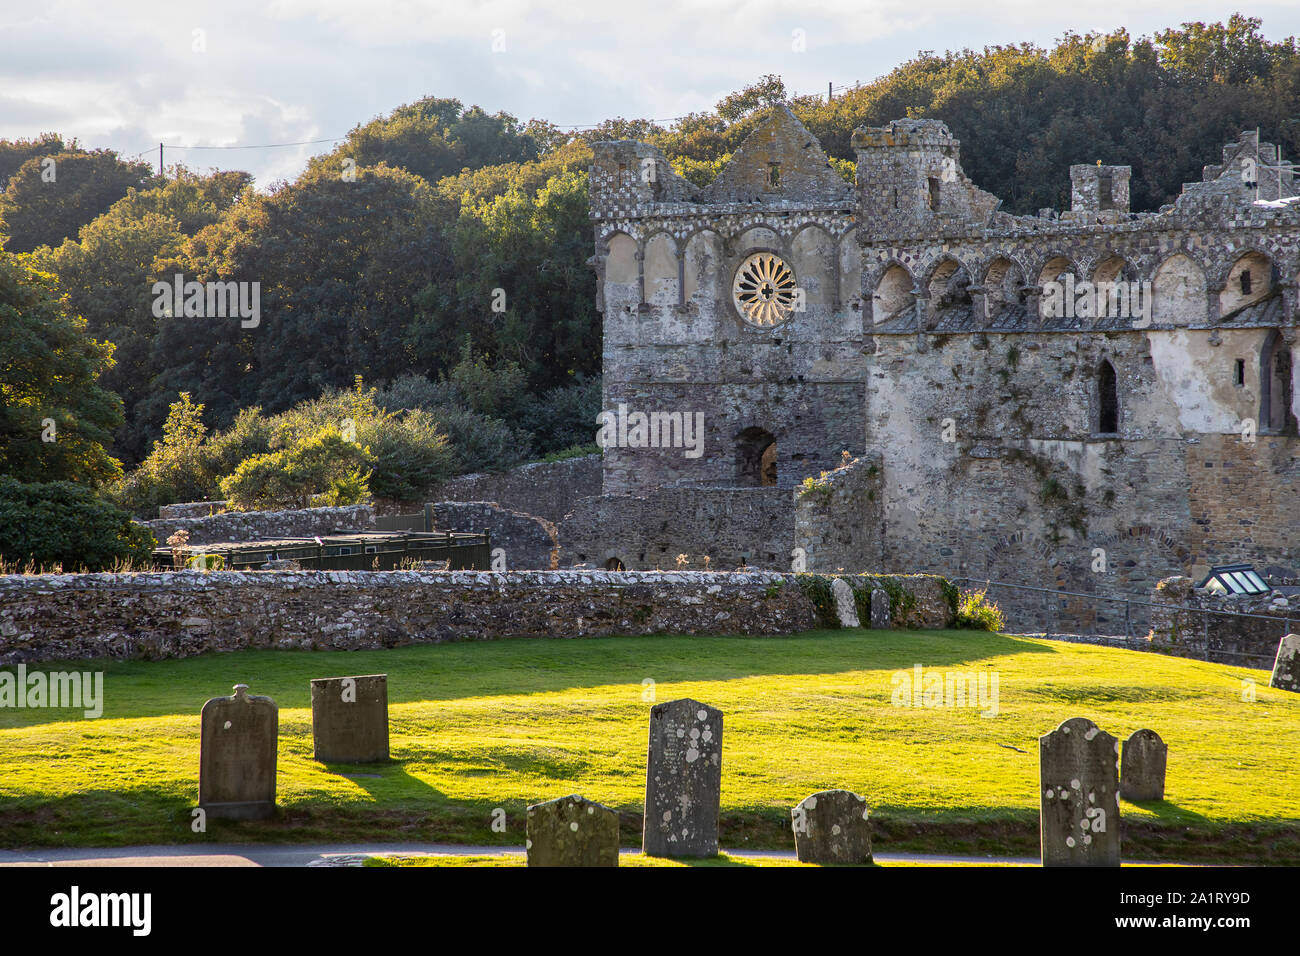 ST DAVIDS, WALES, UK - 8th September 2019: St Davids Bishops Palace is a ruined medieval palace located adjacent to St Davids Cathedral in the city of Stock Photo